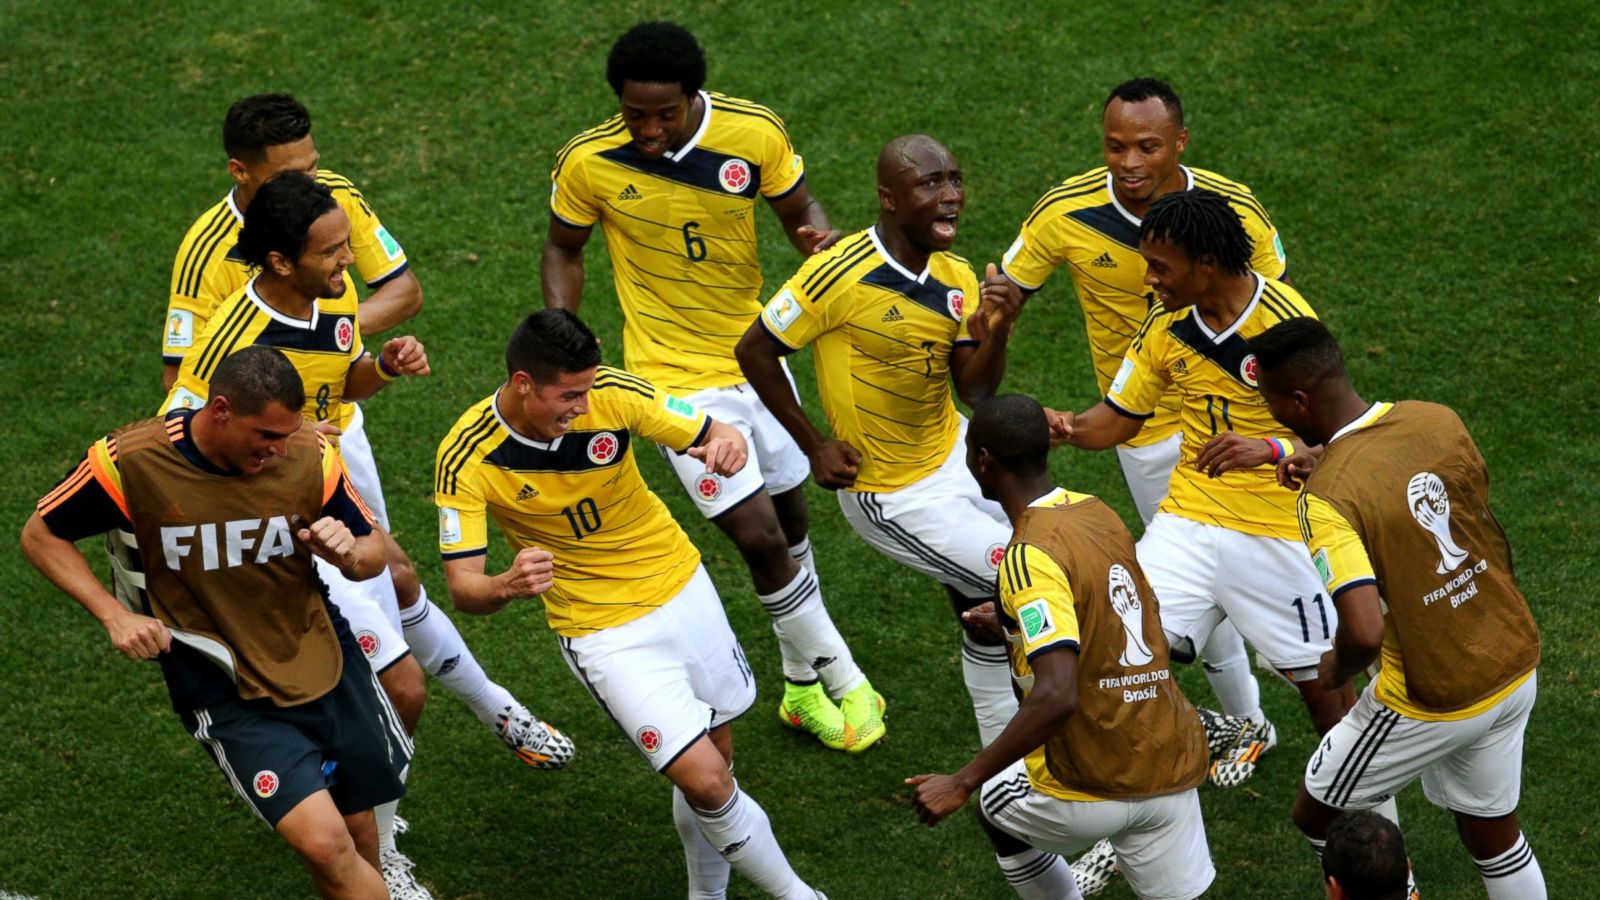 Colombia national team trains in Brasilia ahead of Ivory Coast match